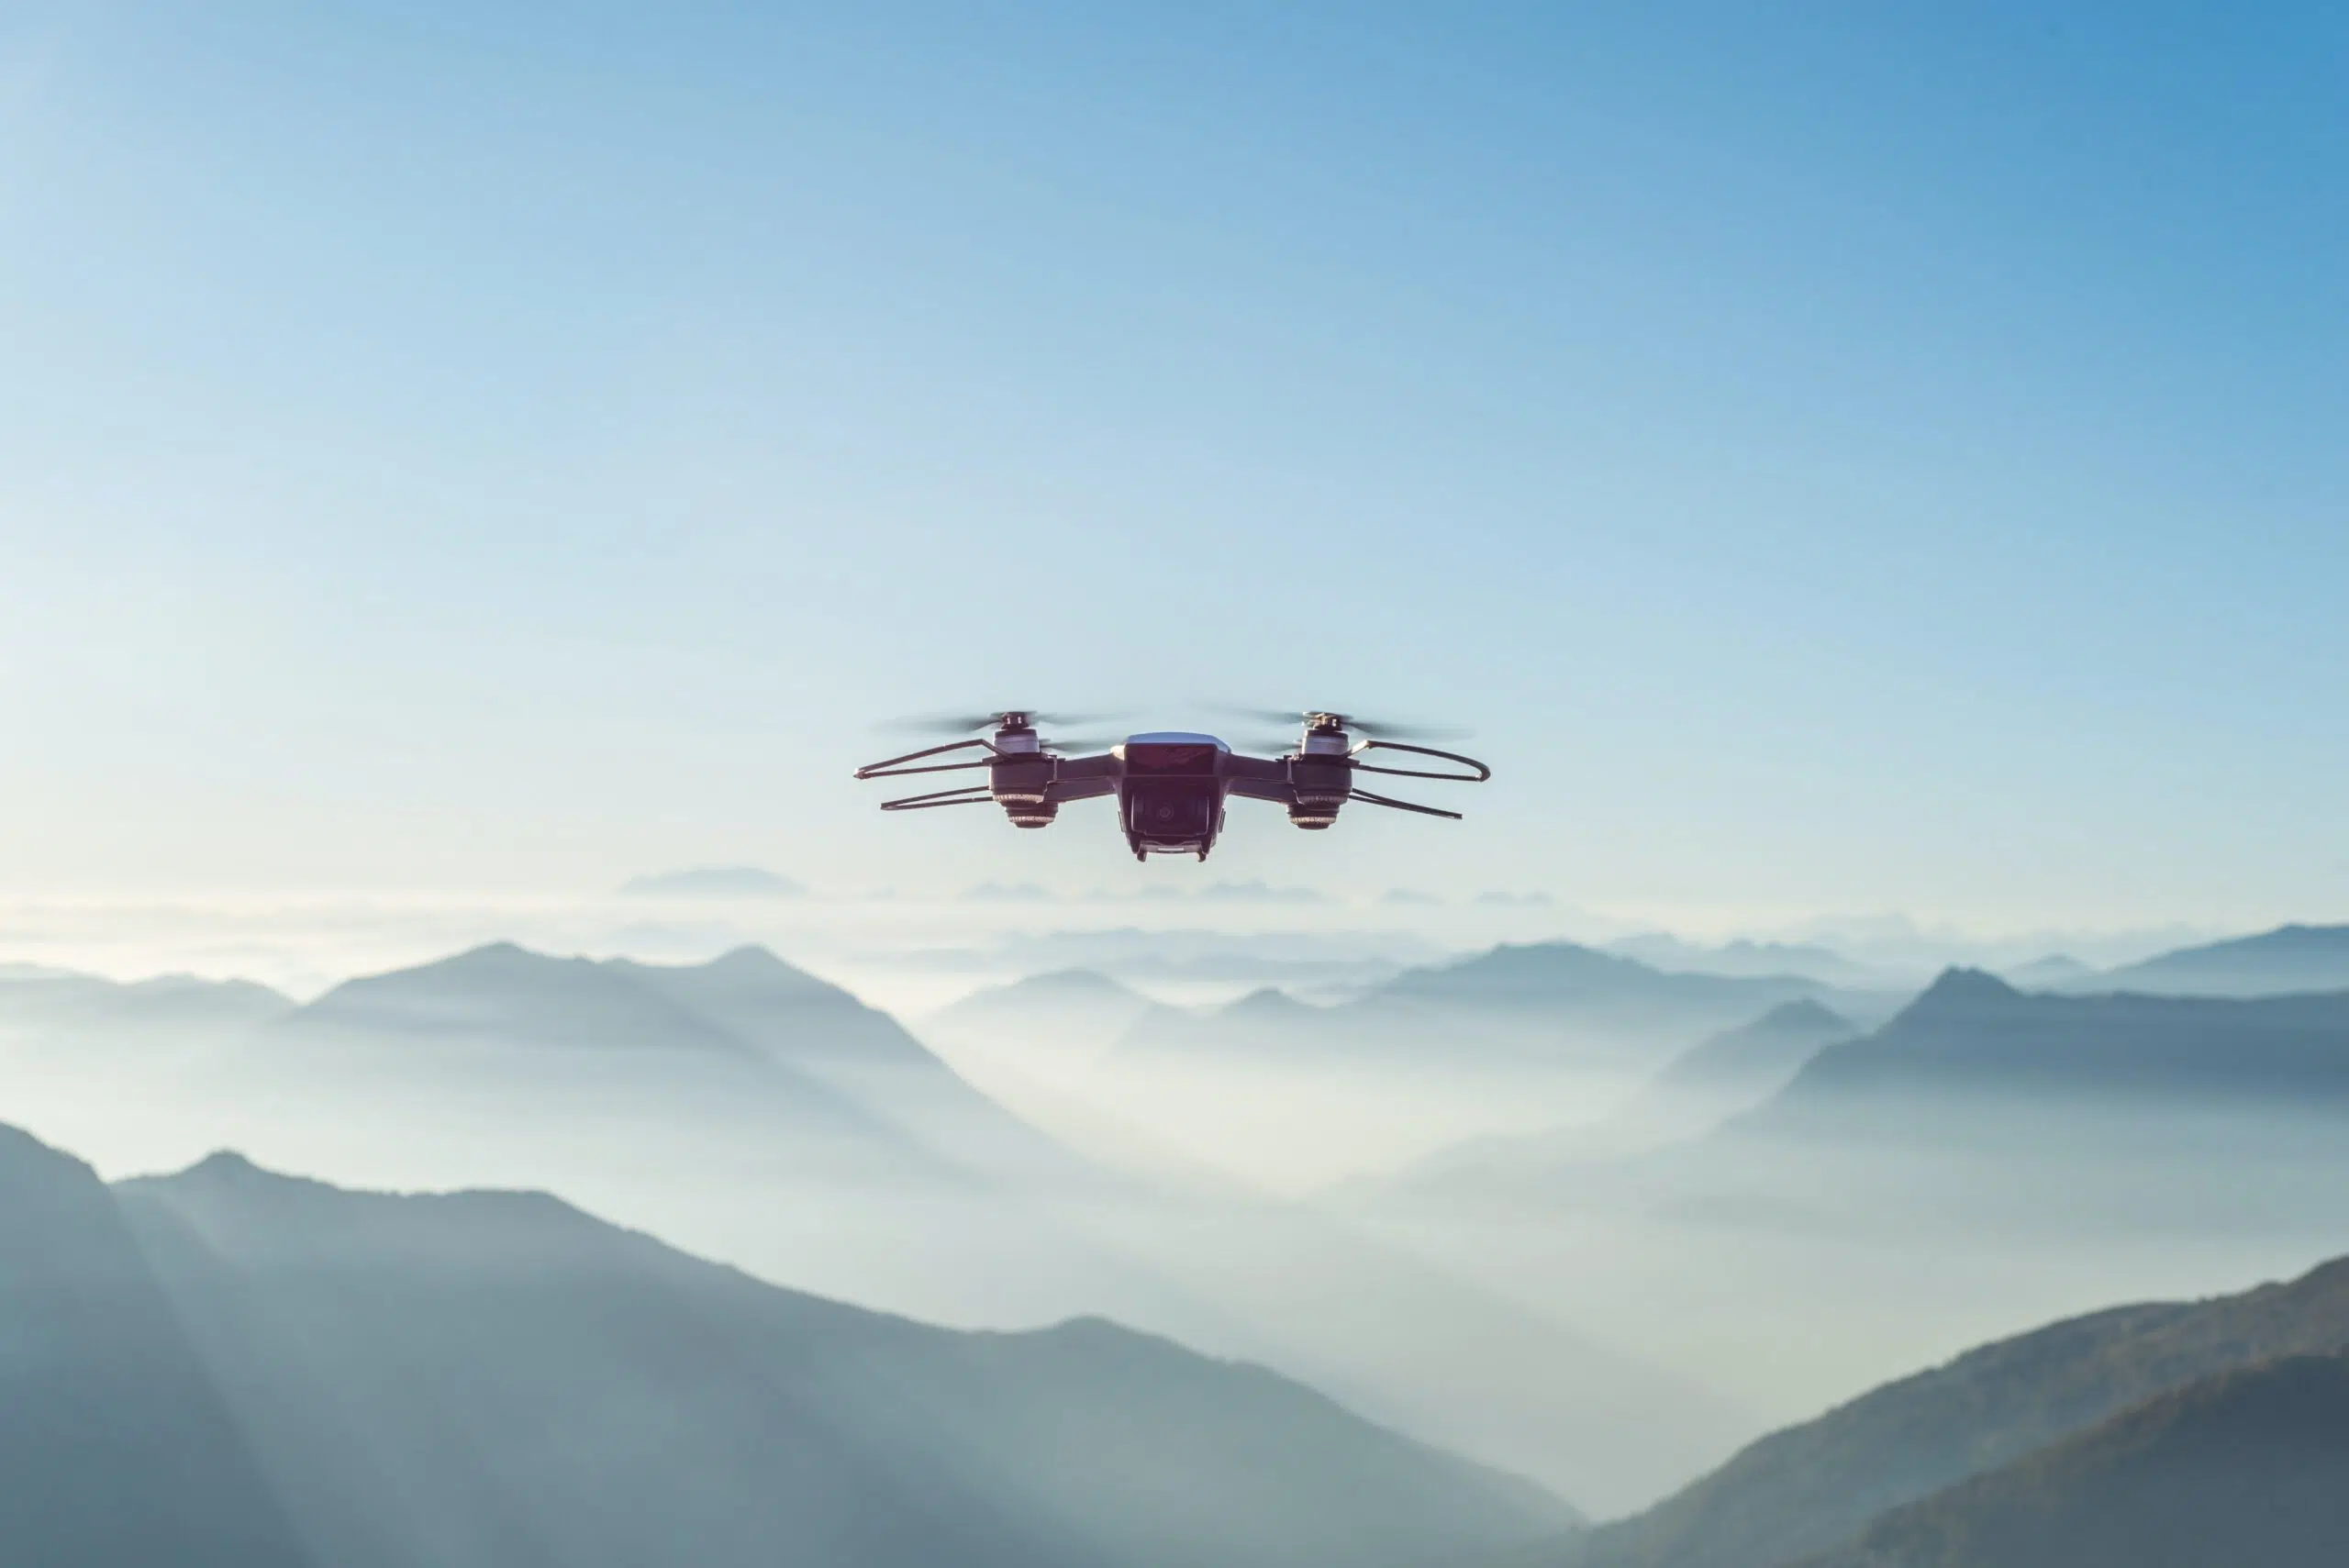 Soar into the Future with Drone Education and Technology